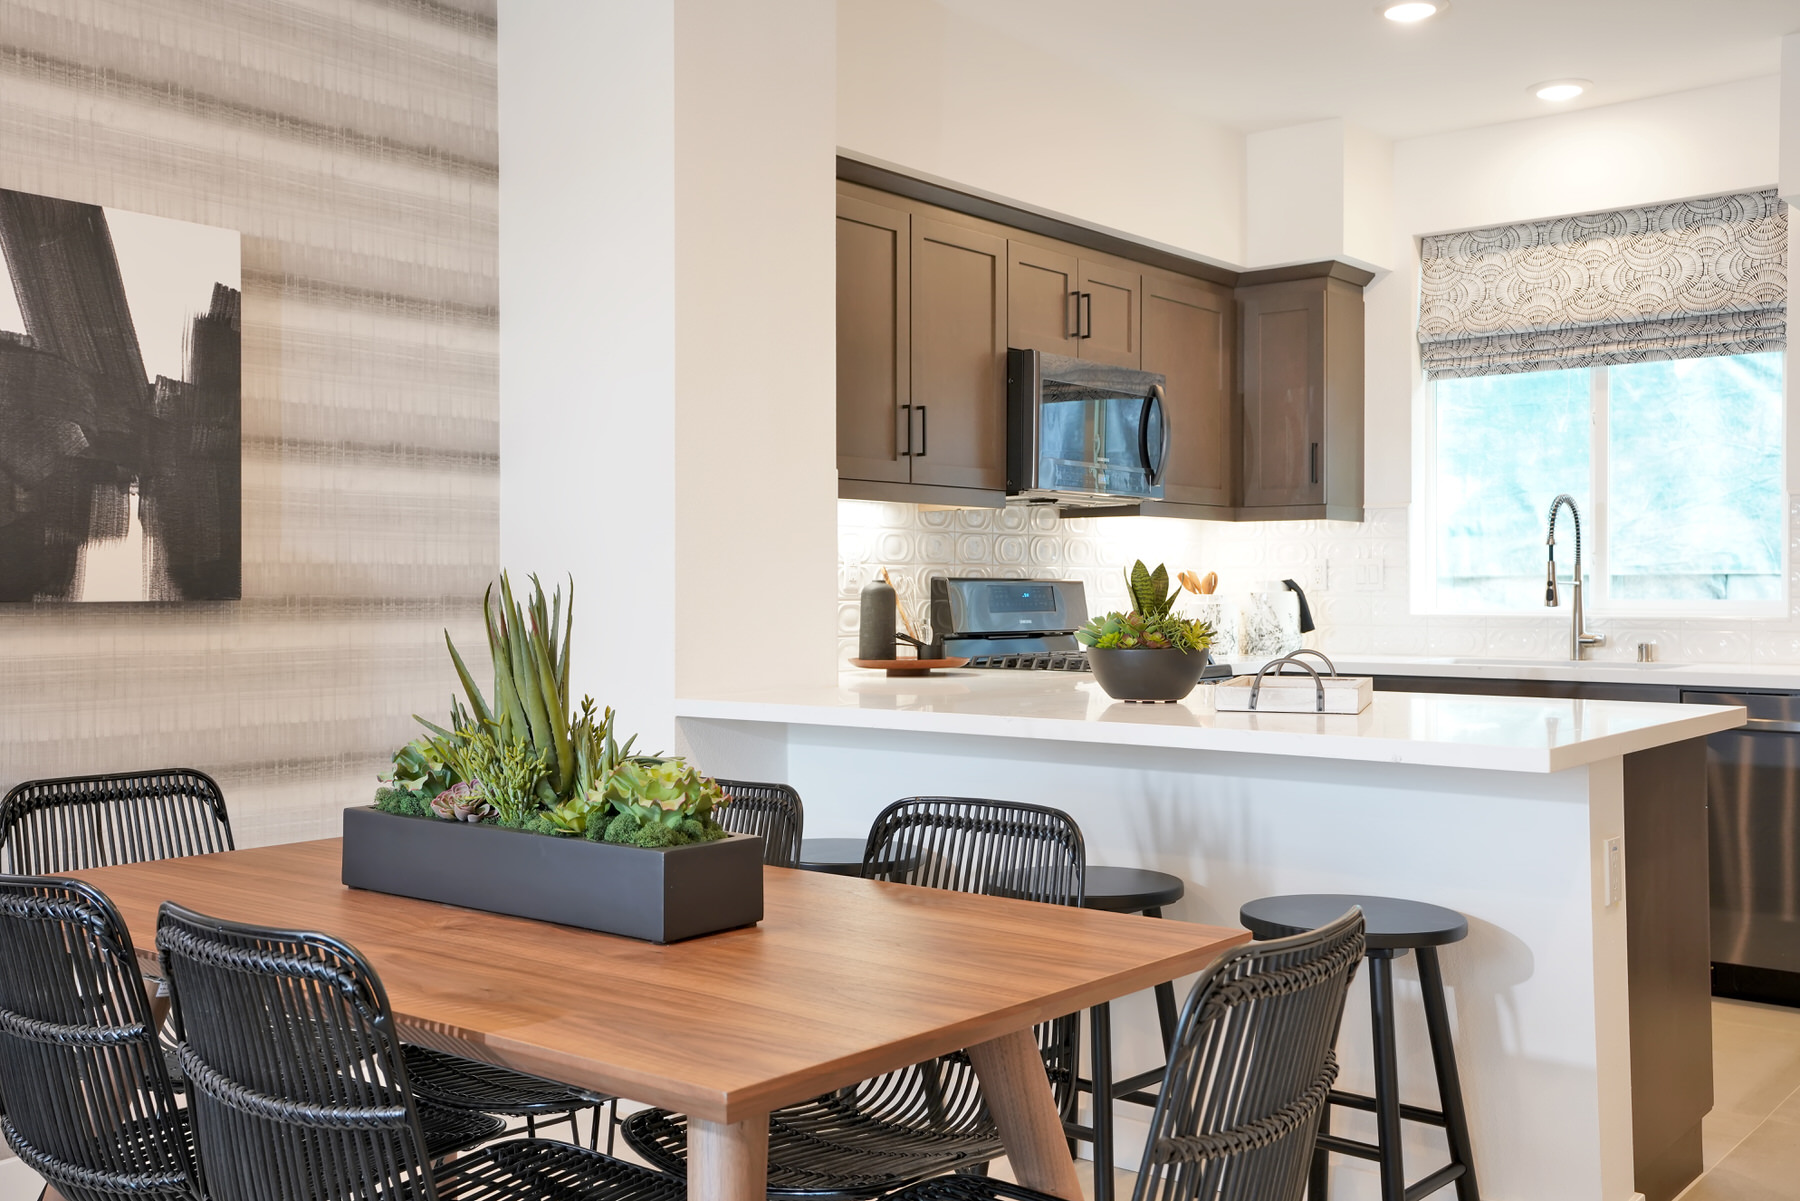 Dining/Kitchen in Plan 1 at Townes at Magnolia by Melia Homes in Anaheim, CA